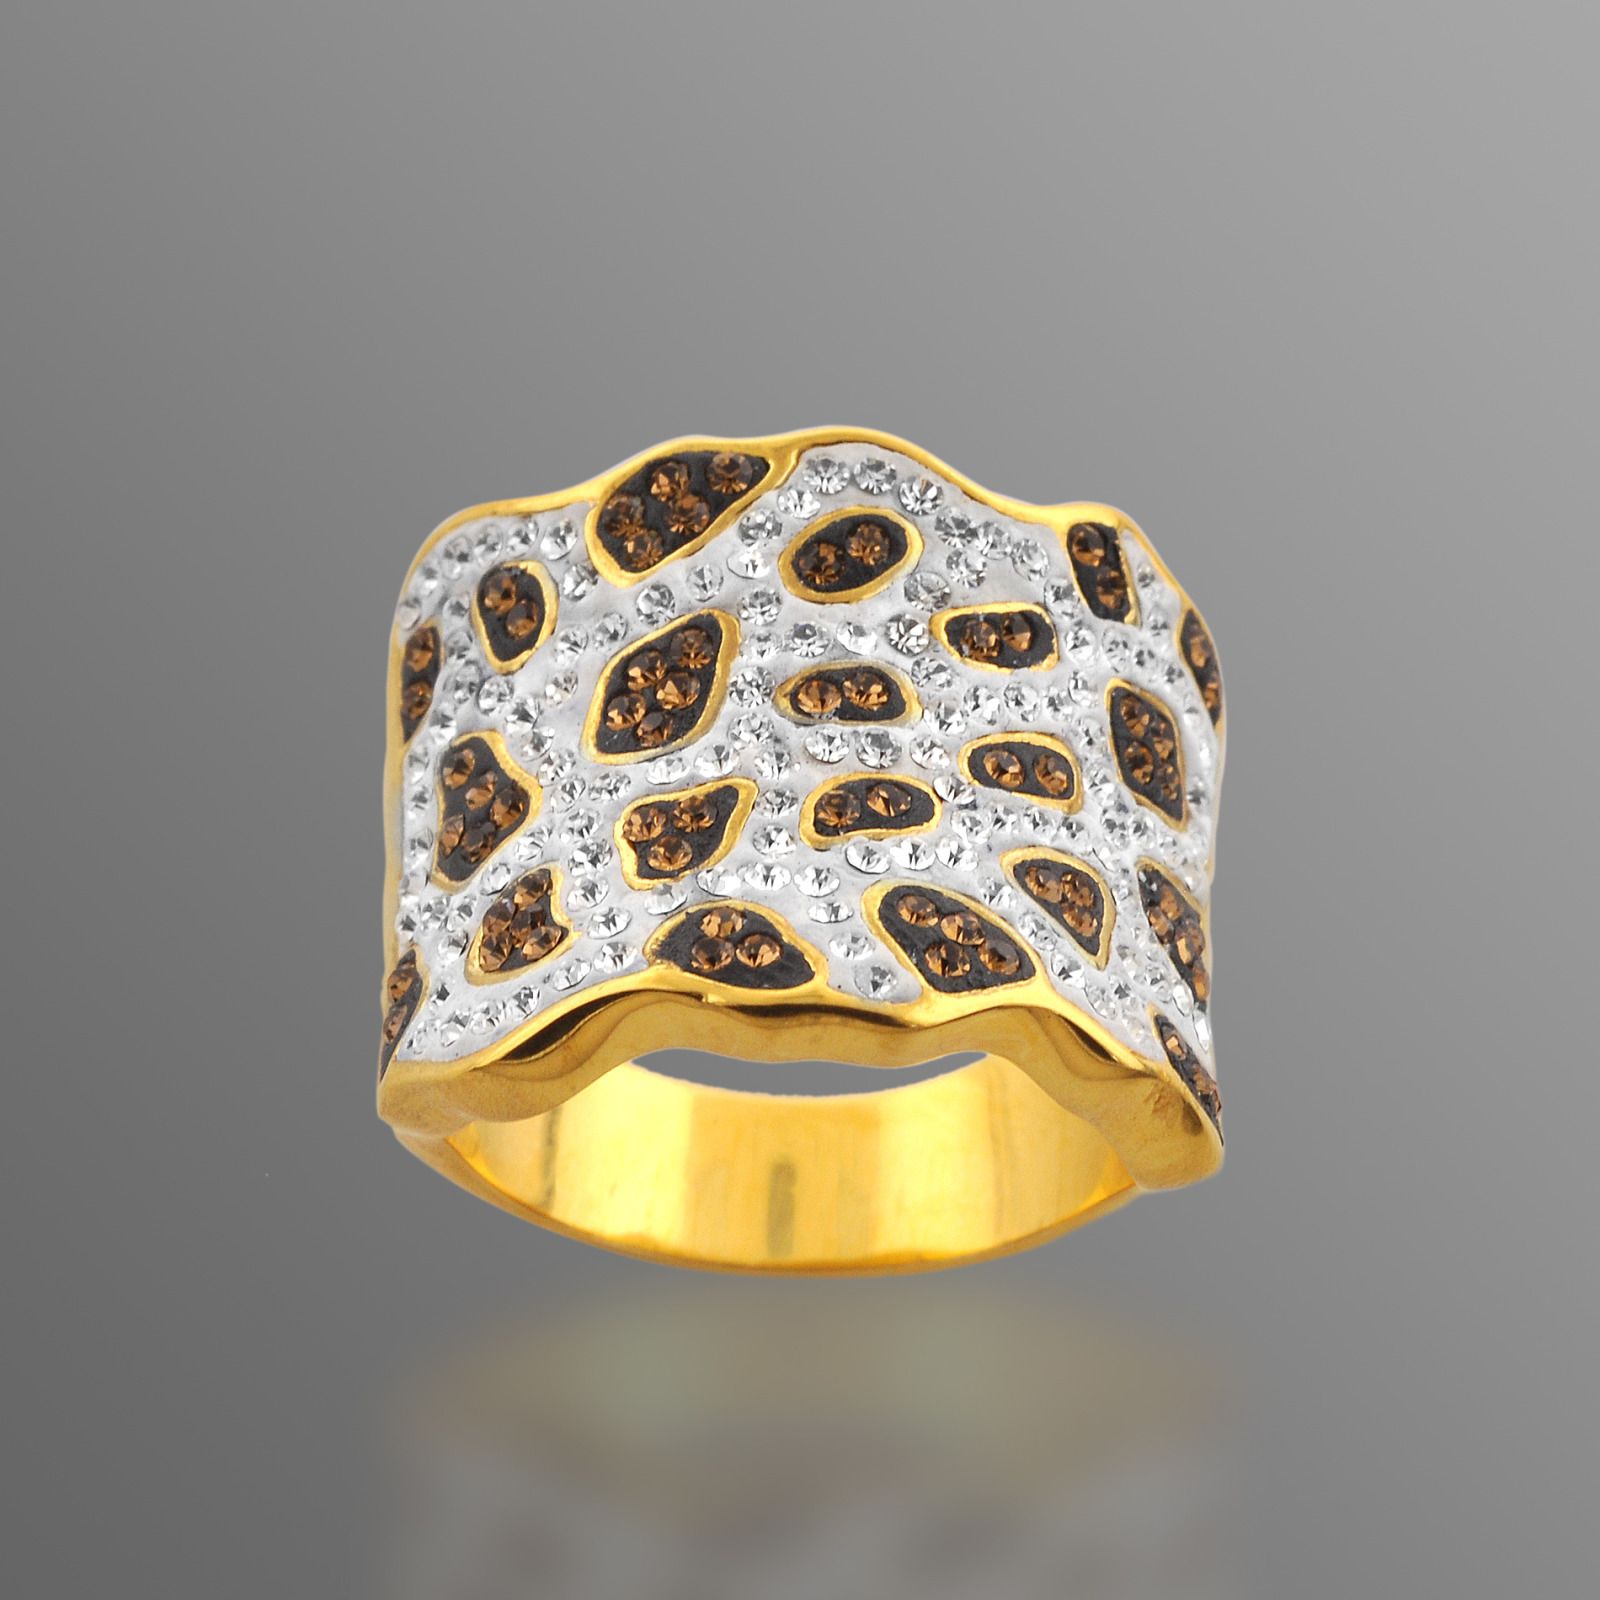 Shades Of Elegance Gold over Bronze Brown and White Crystal Animal Design Ring